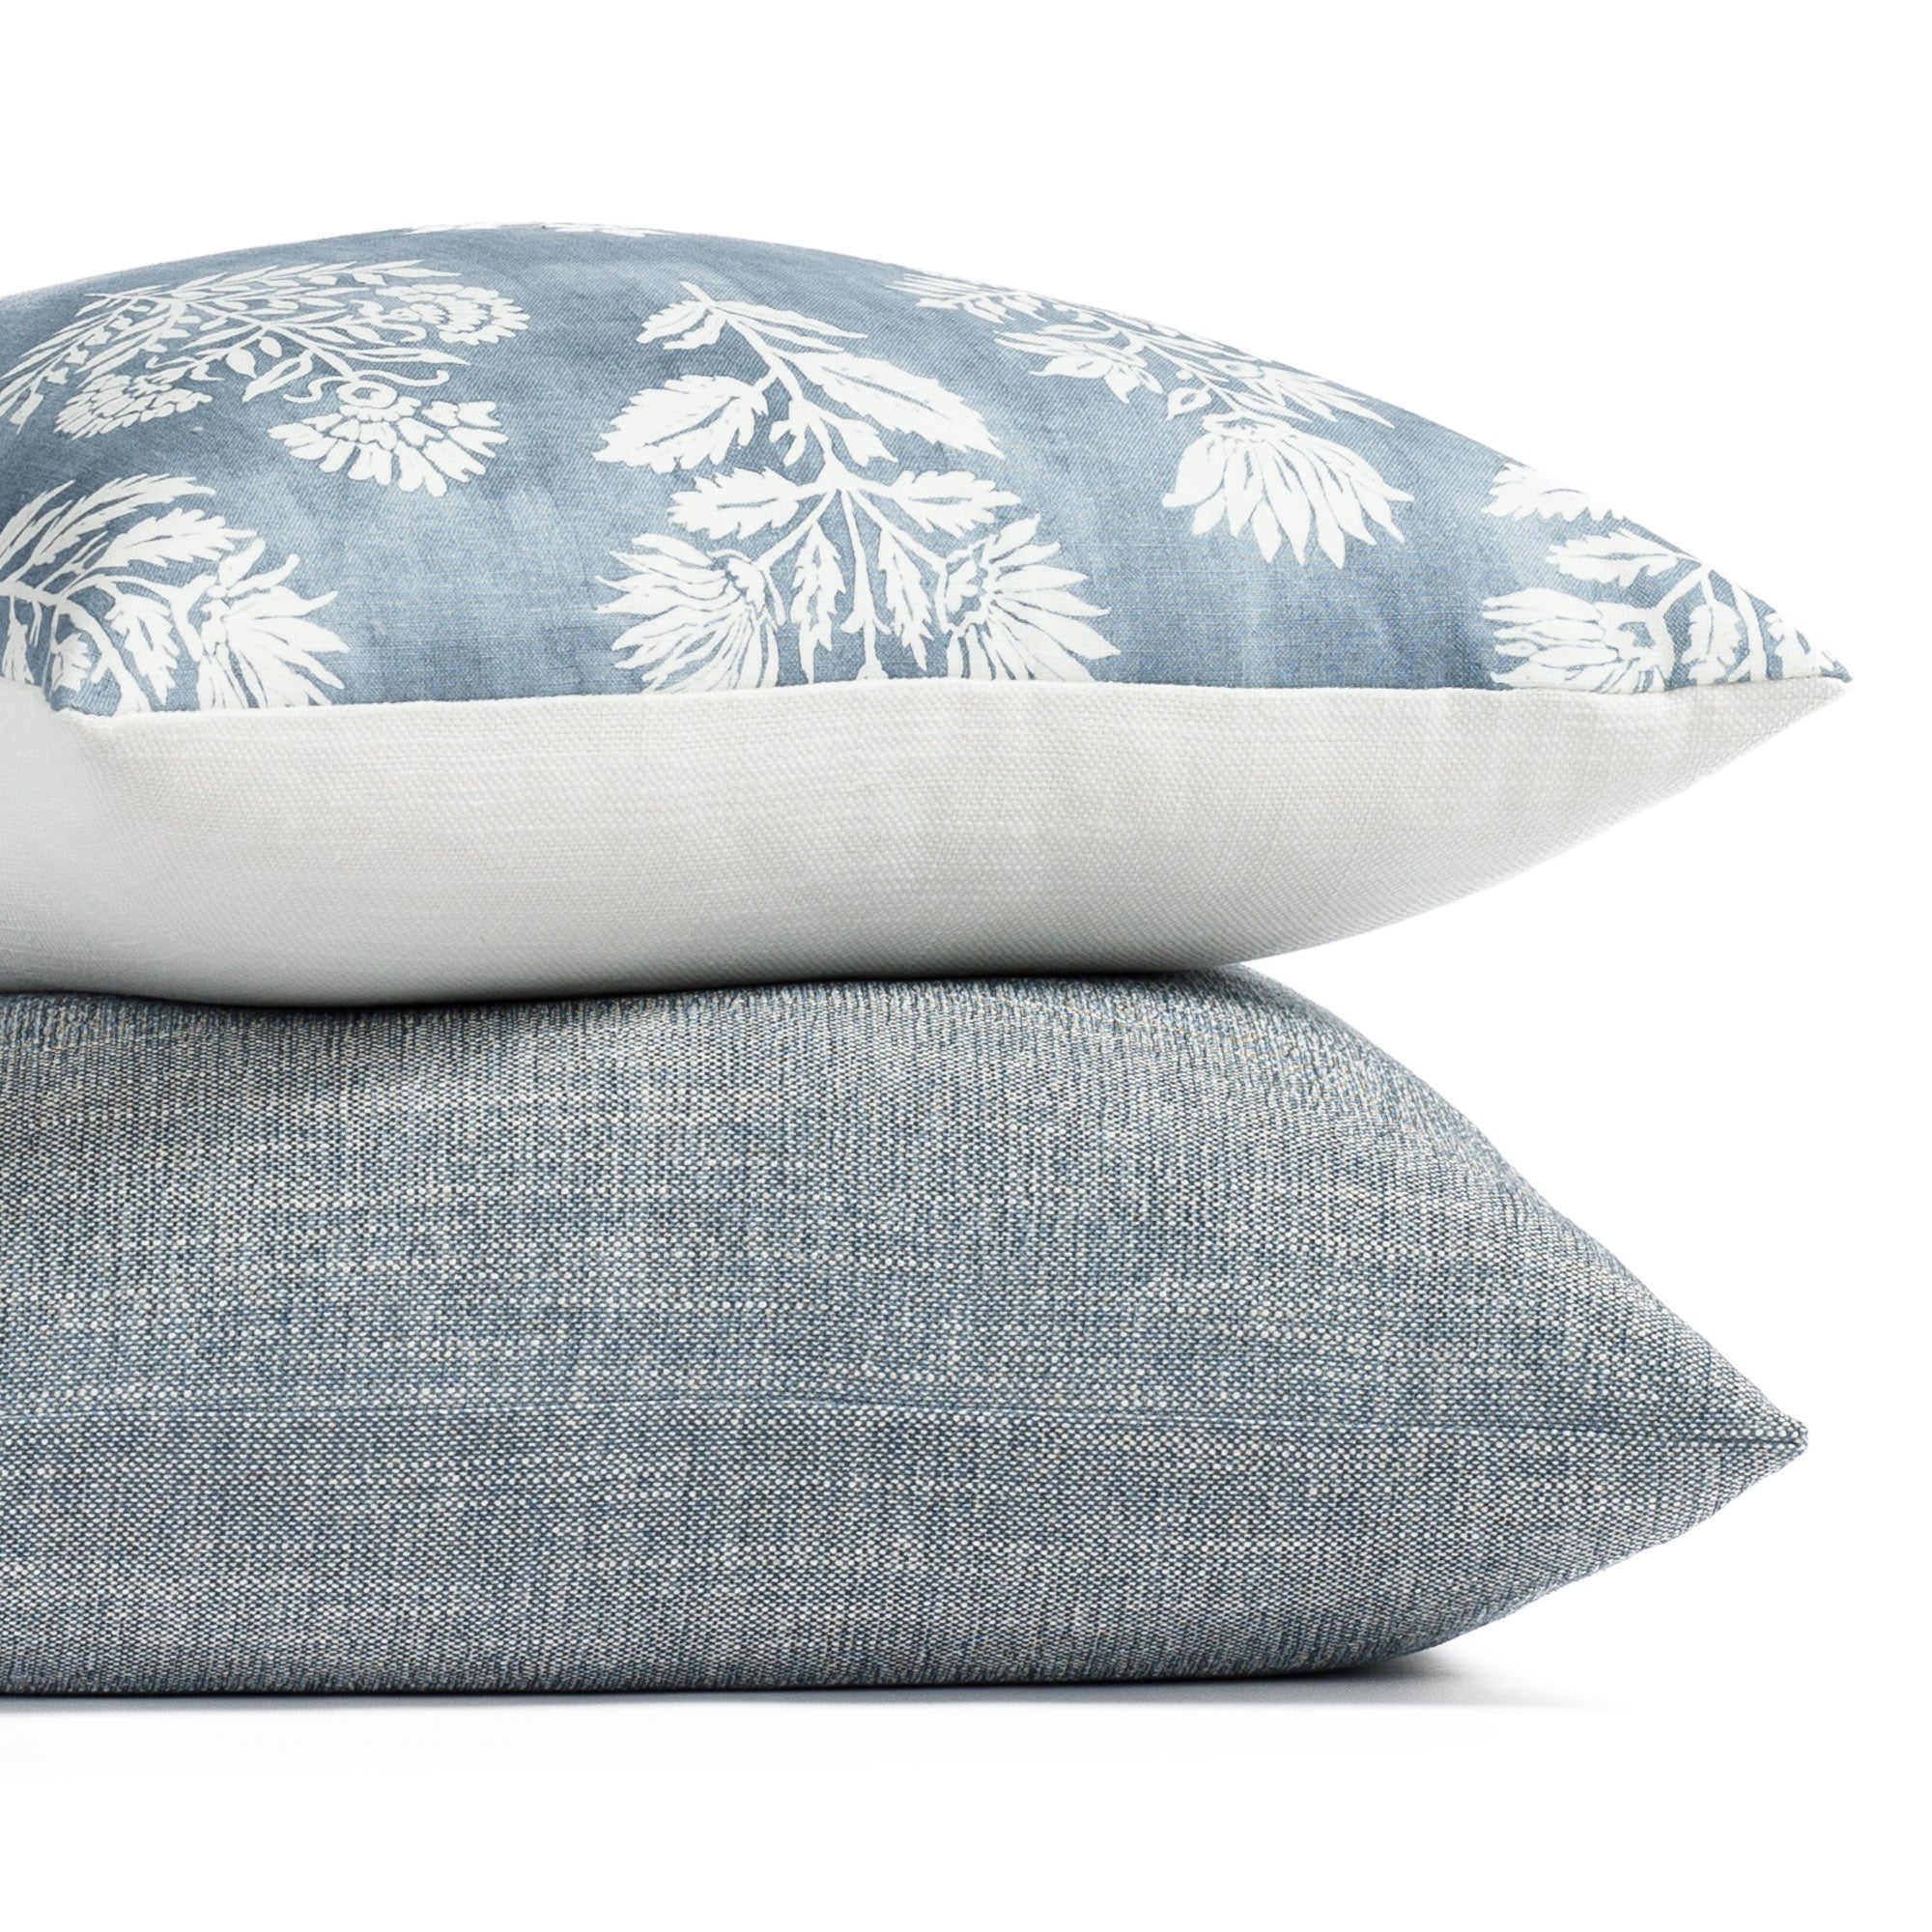 Tonic Living blue and white pillows